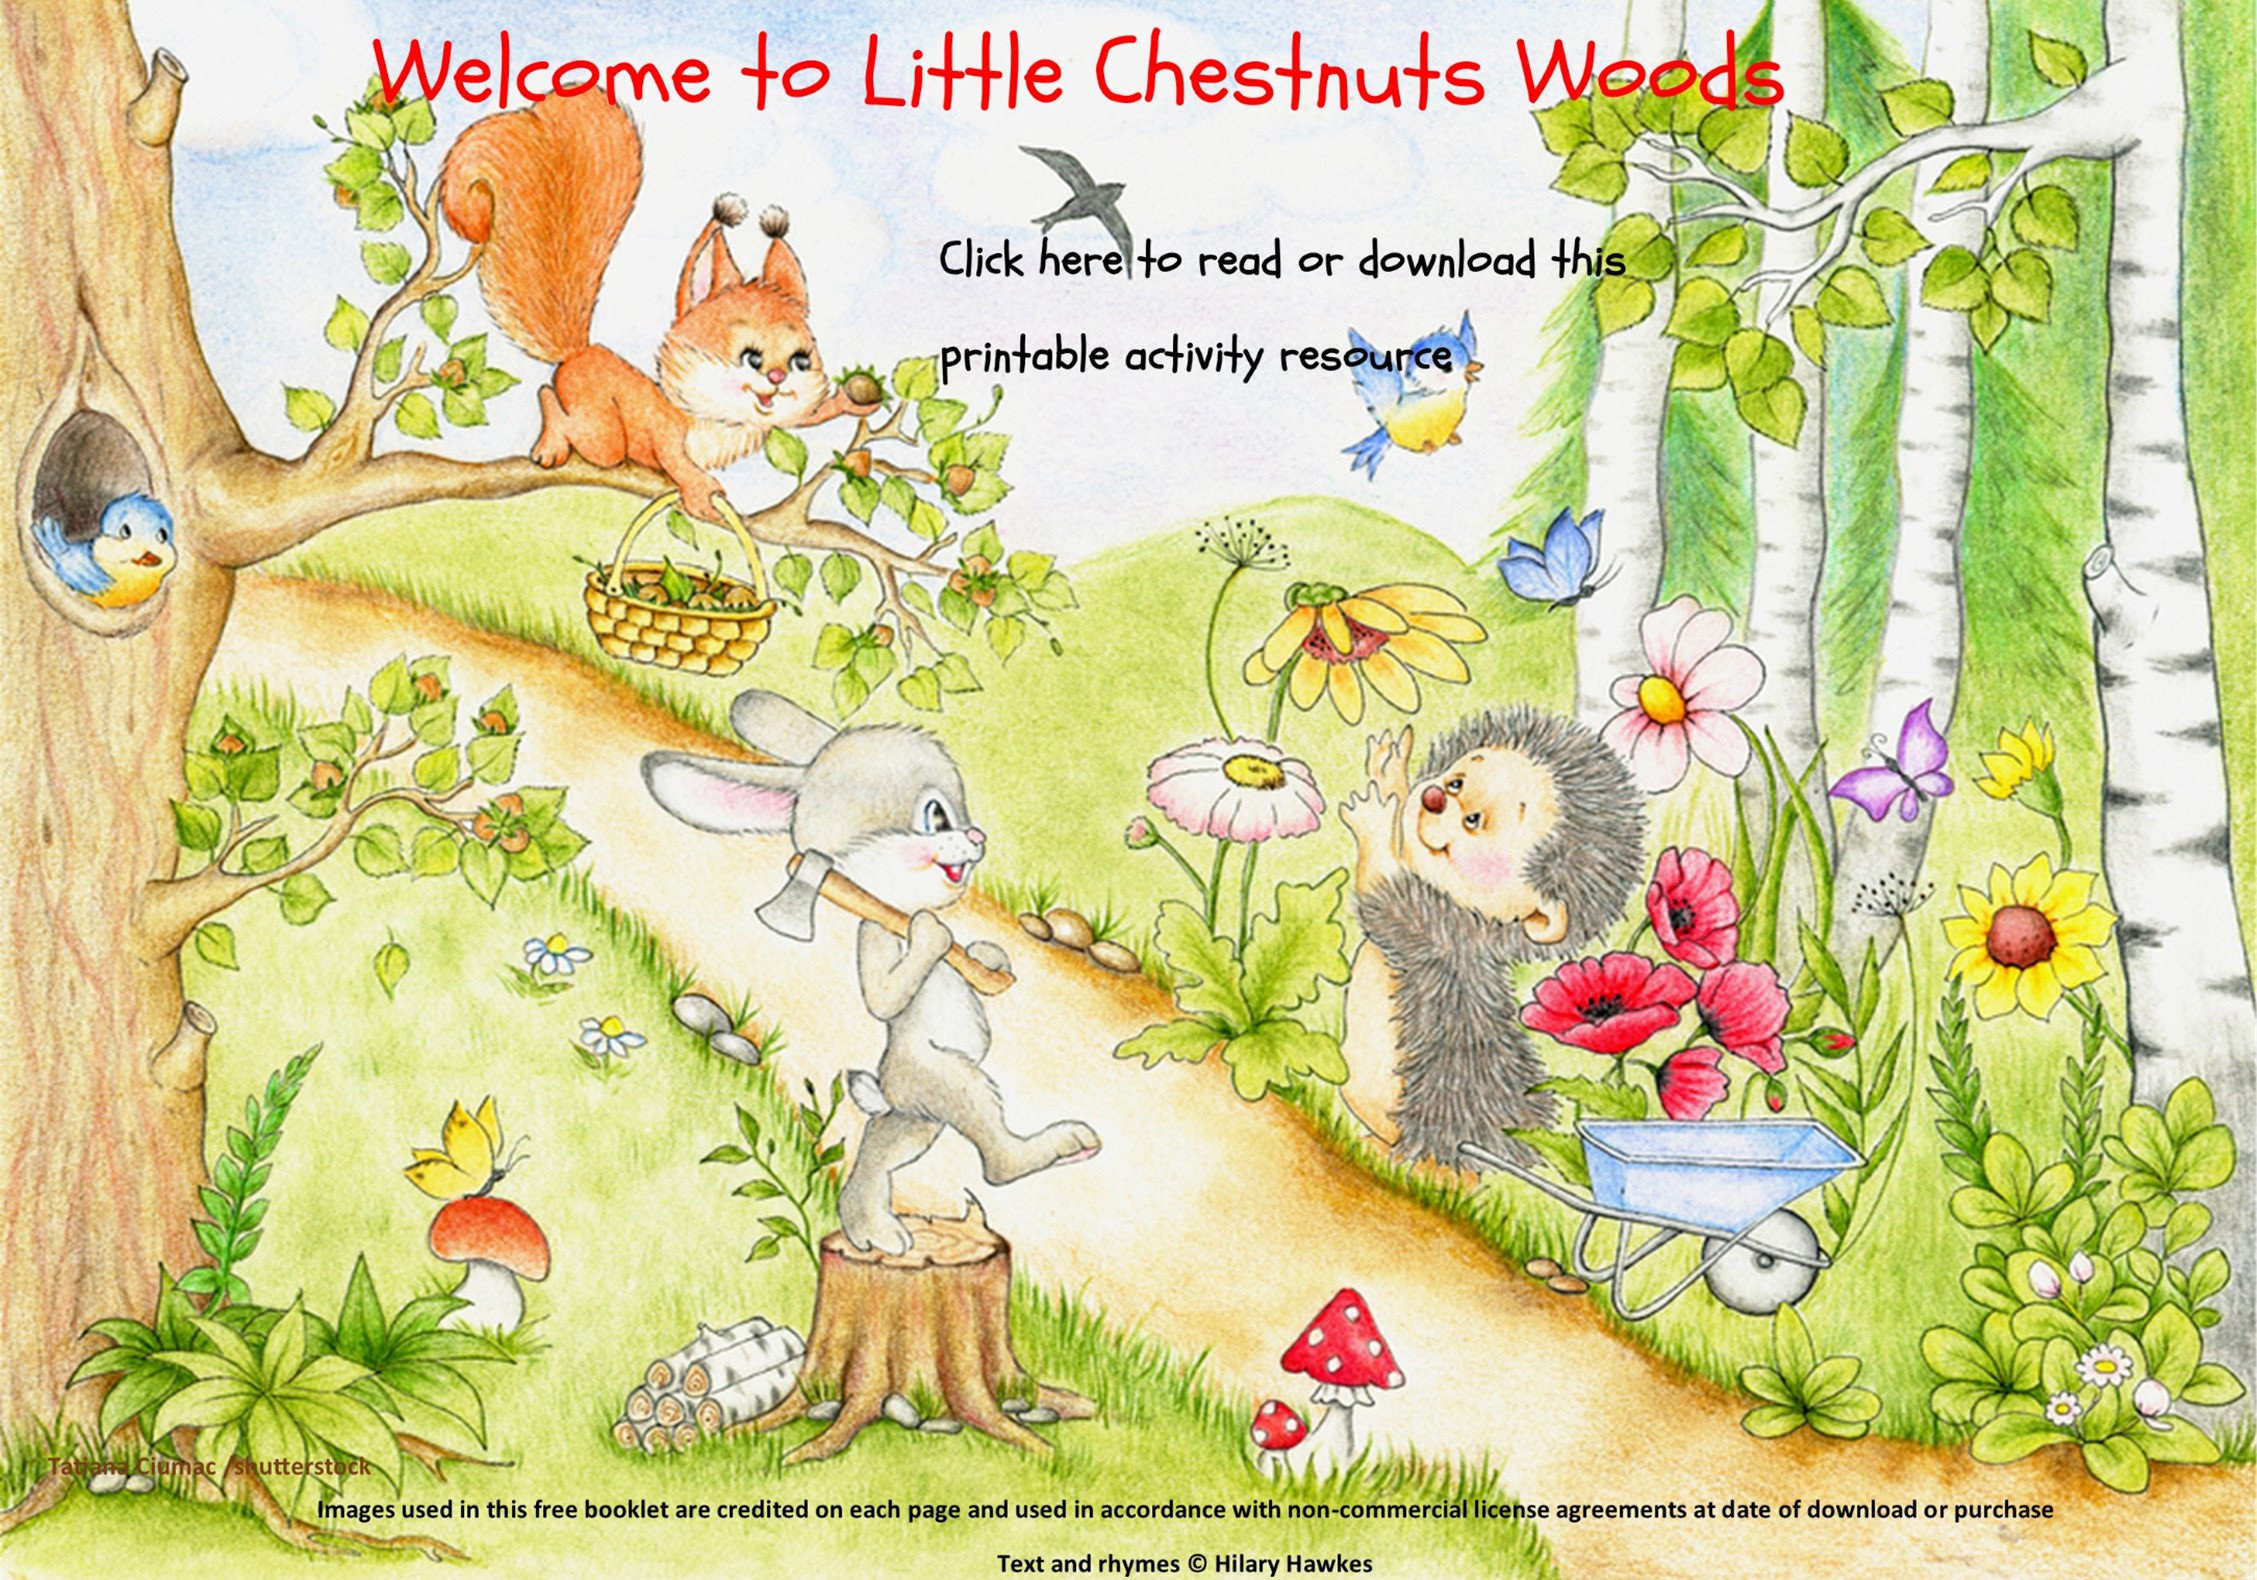 Little Chestnuts - small group sessions for children in pre-school, nursery, school reception classes or groups of any kind.